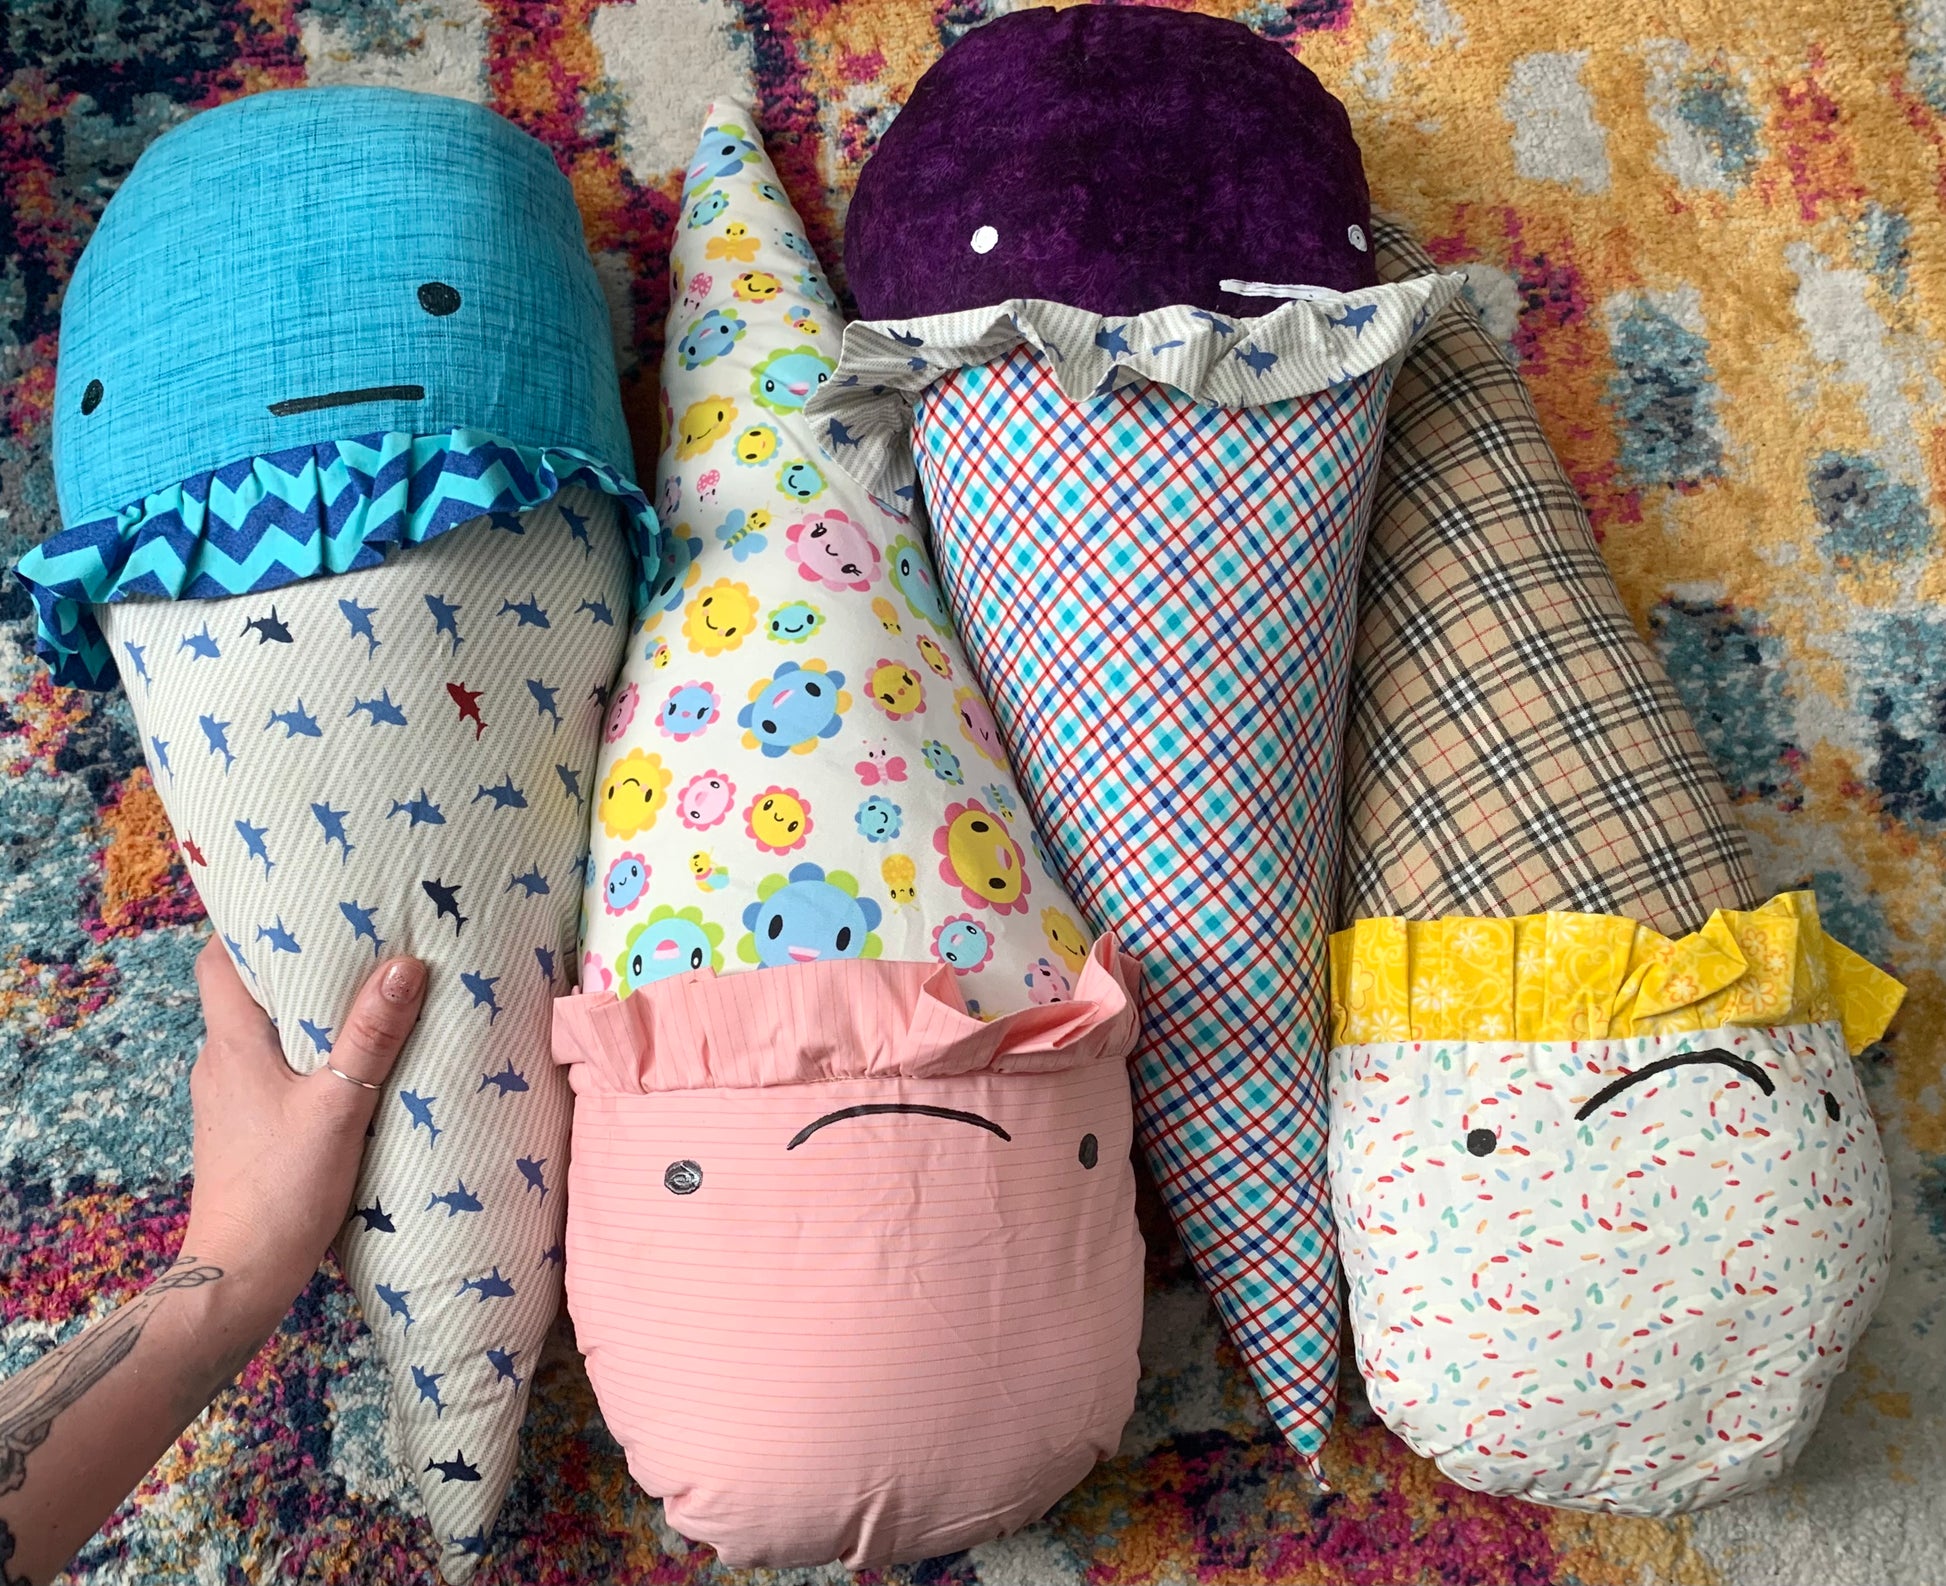 group shot, aerial view of GIANT ice cream cone pillows, with assorted faces, one hand holds the one on left, against a colorful background